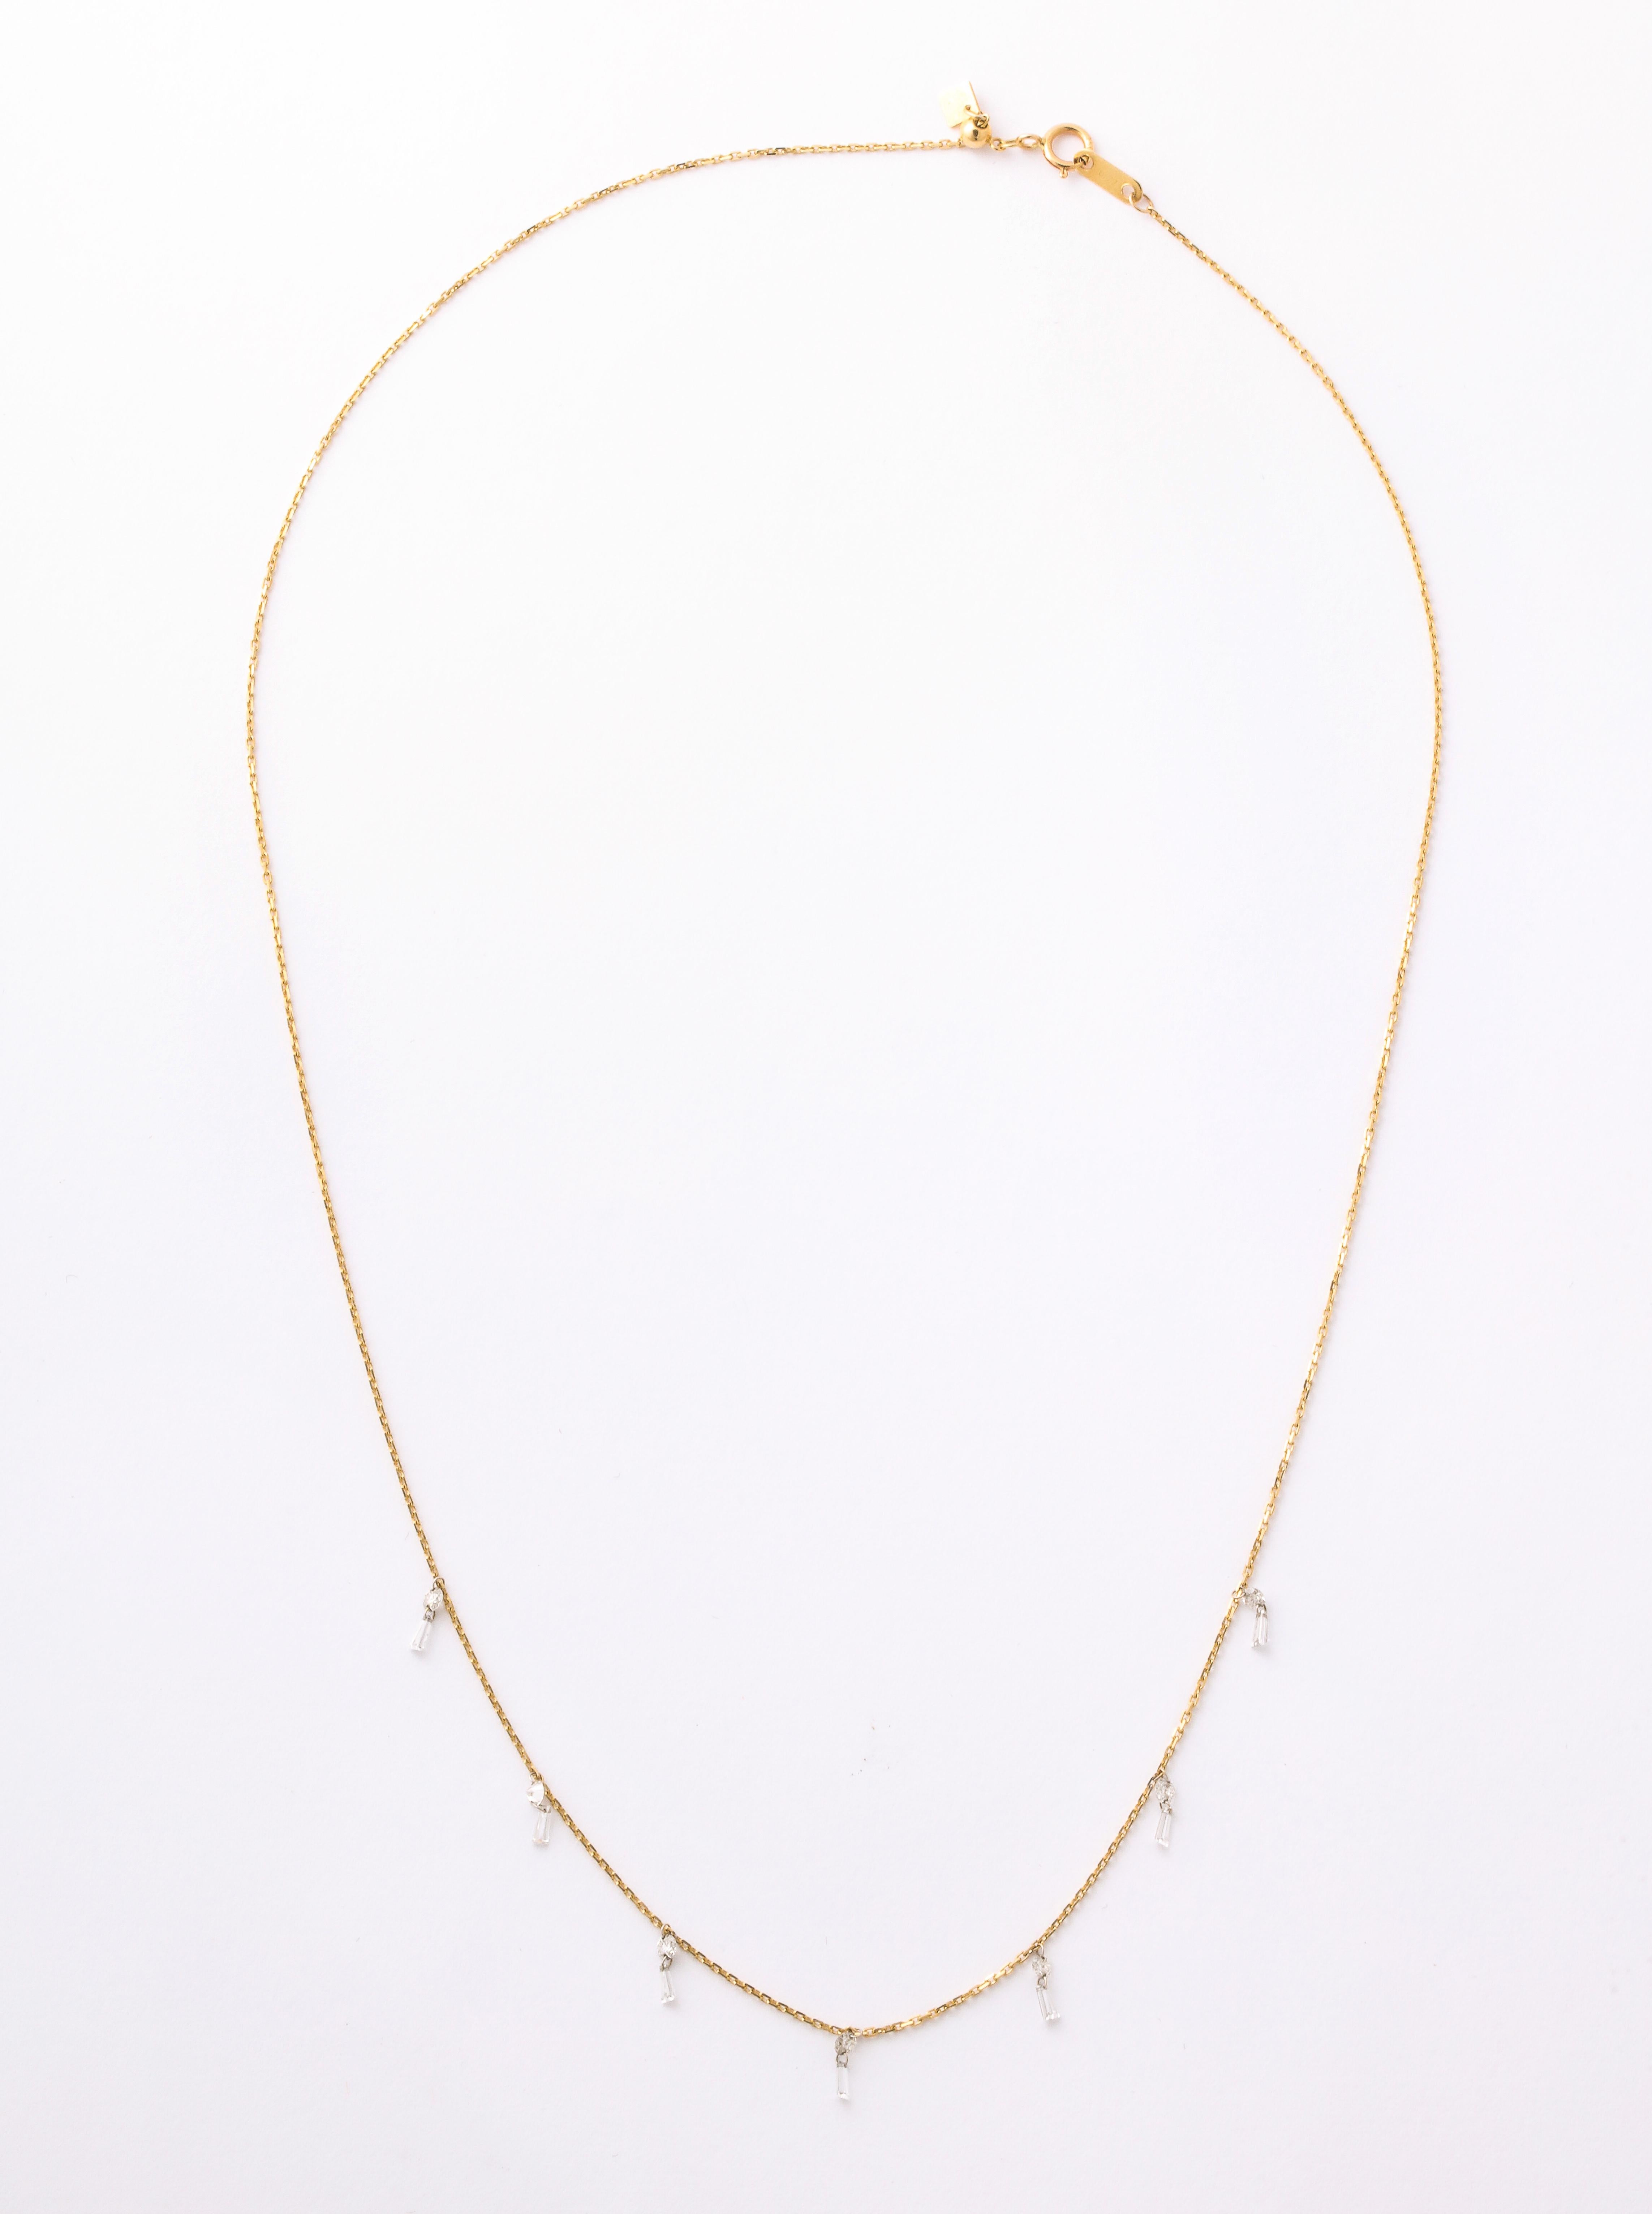   This is a special necklace with a total of 1 ct Dangling  Baguette Diamonds which are 
  drillled and  suspended on an 18K fine gold chain, making it easily  wearable all the time 
 alone or with other necklaces.  This is so comfortable you never